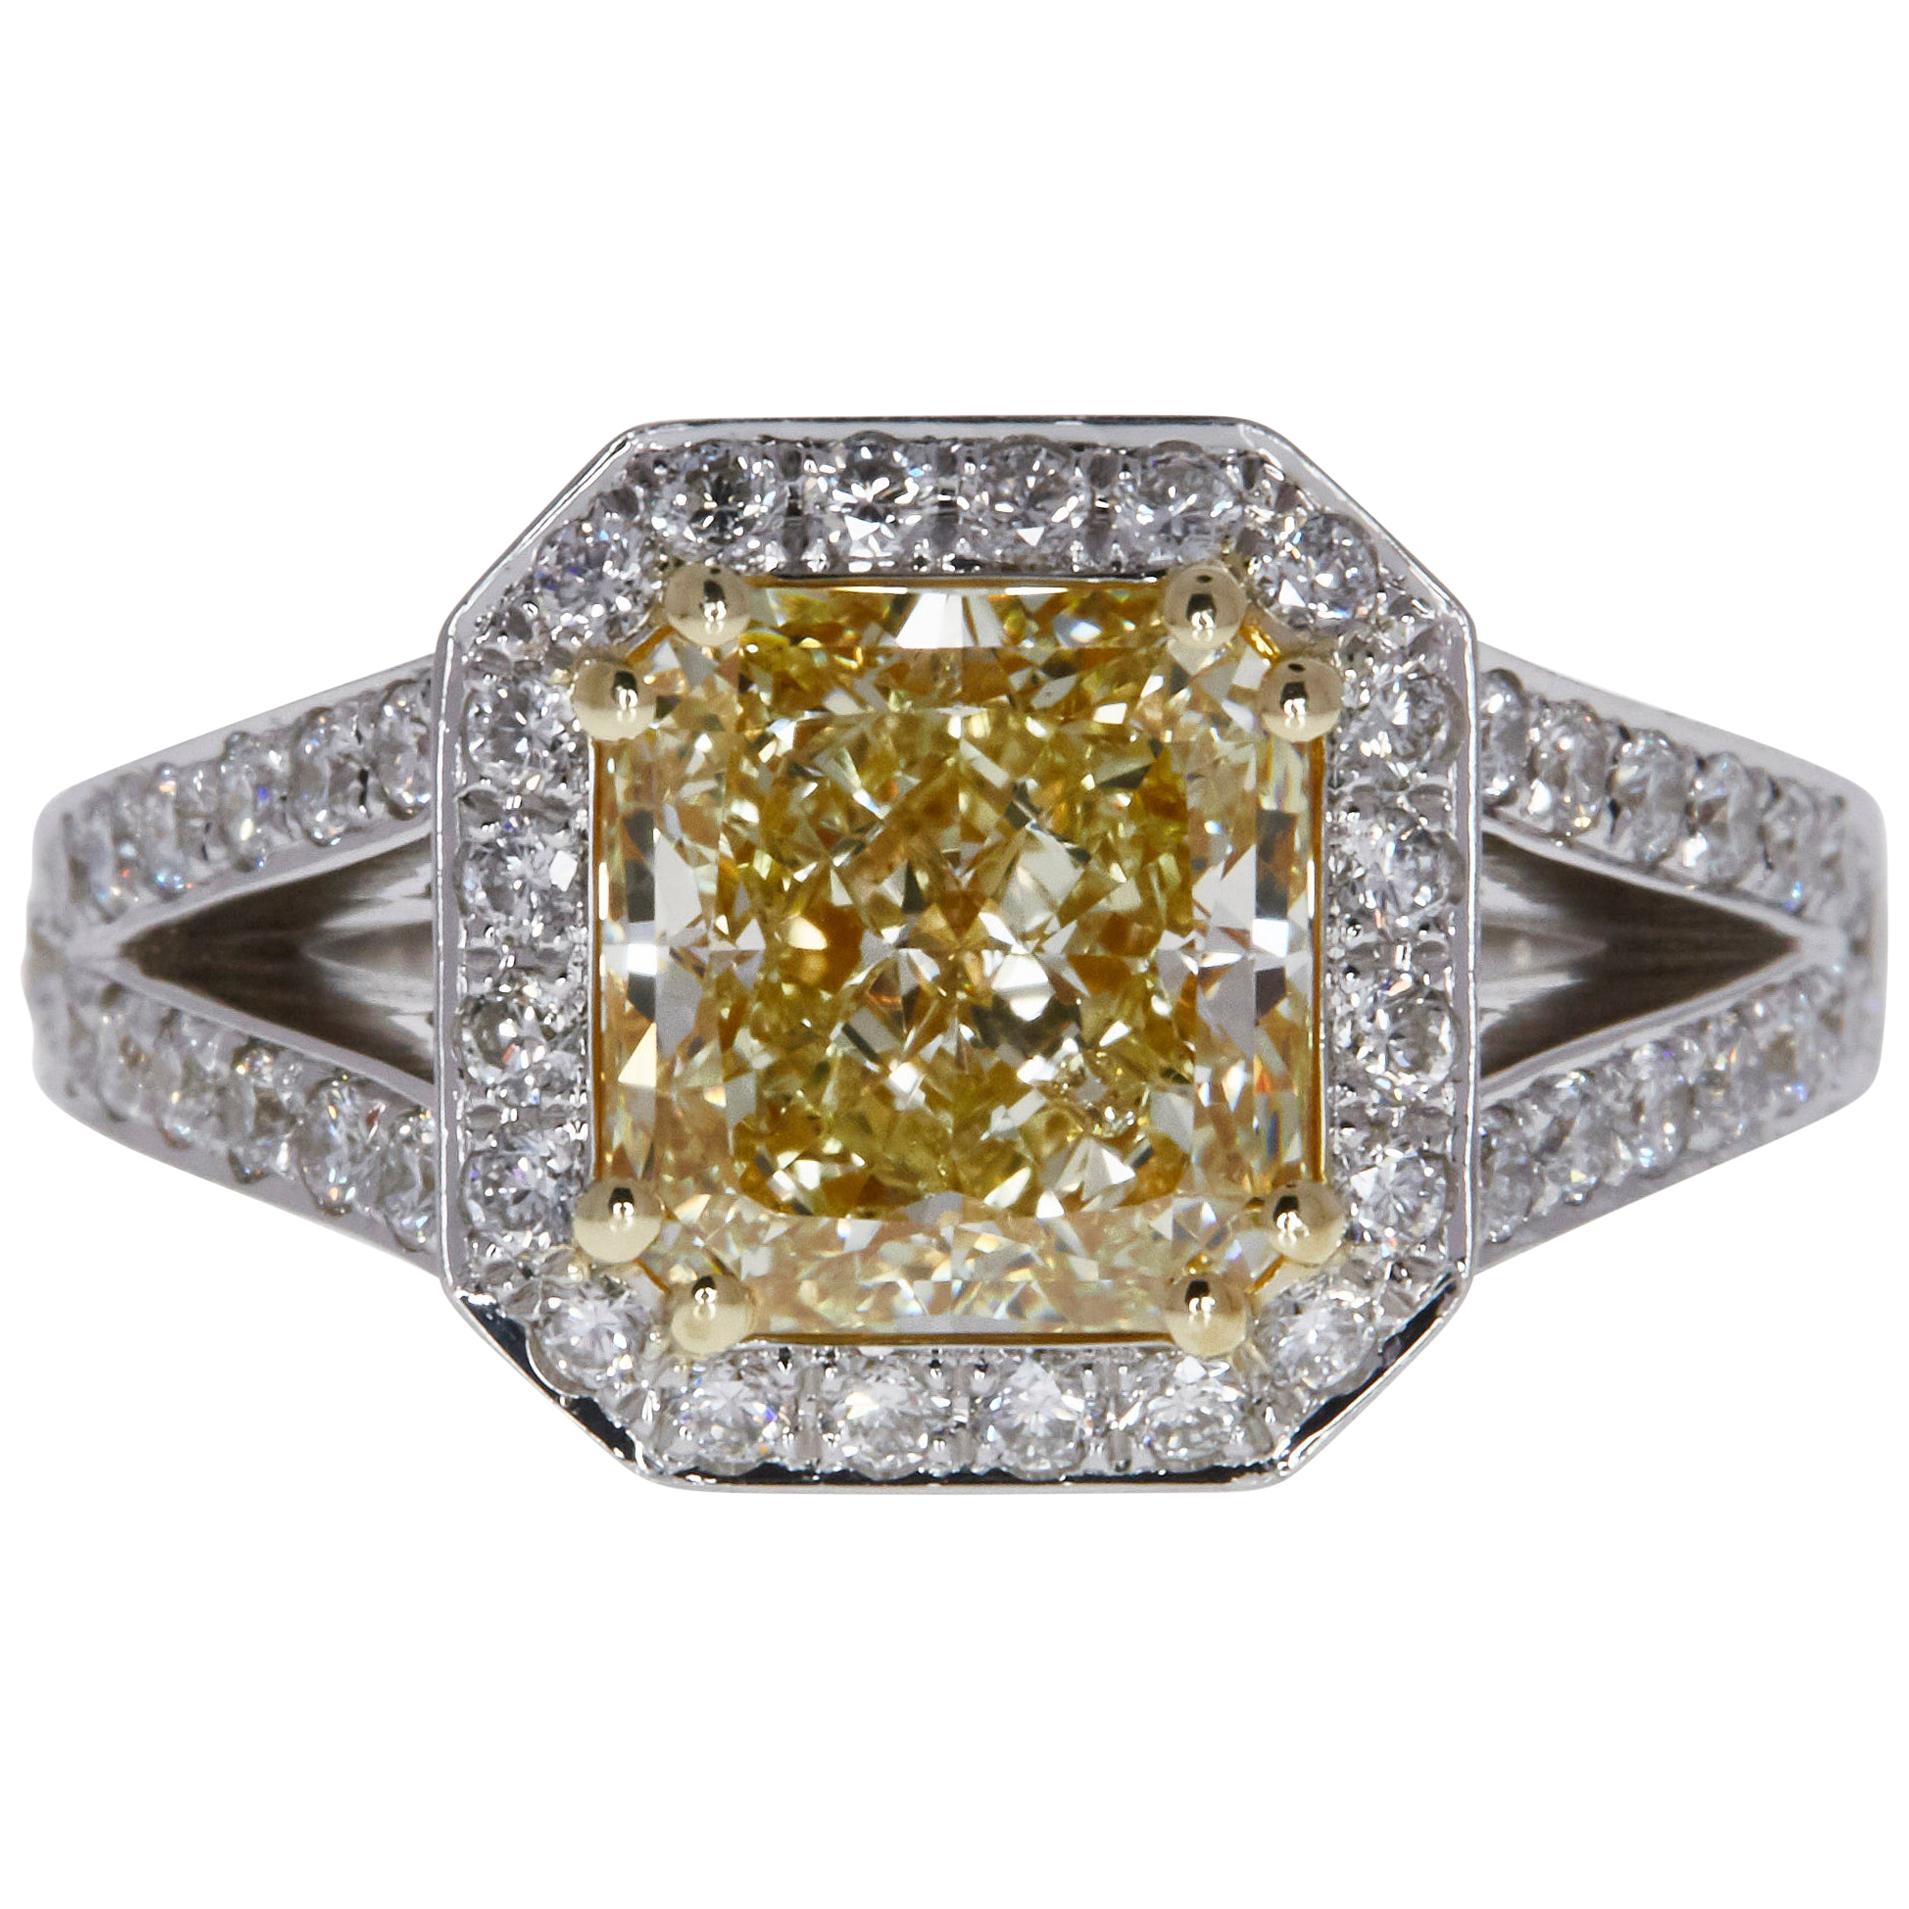 GIA Certified 1.62 Carat Fancy Greenish Yellow-Brown Radiant Diamond Ring in 14K For Sale